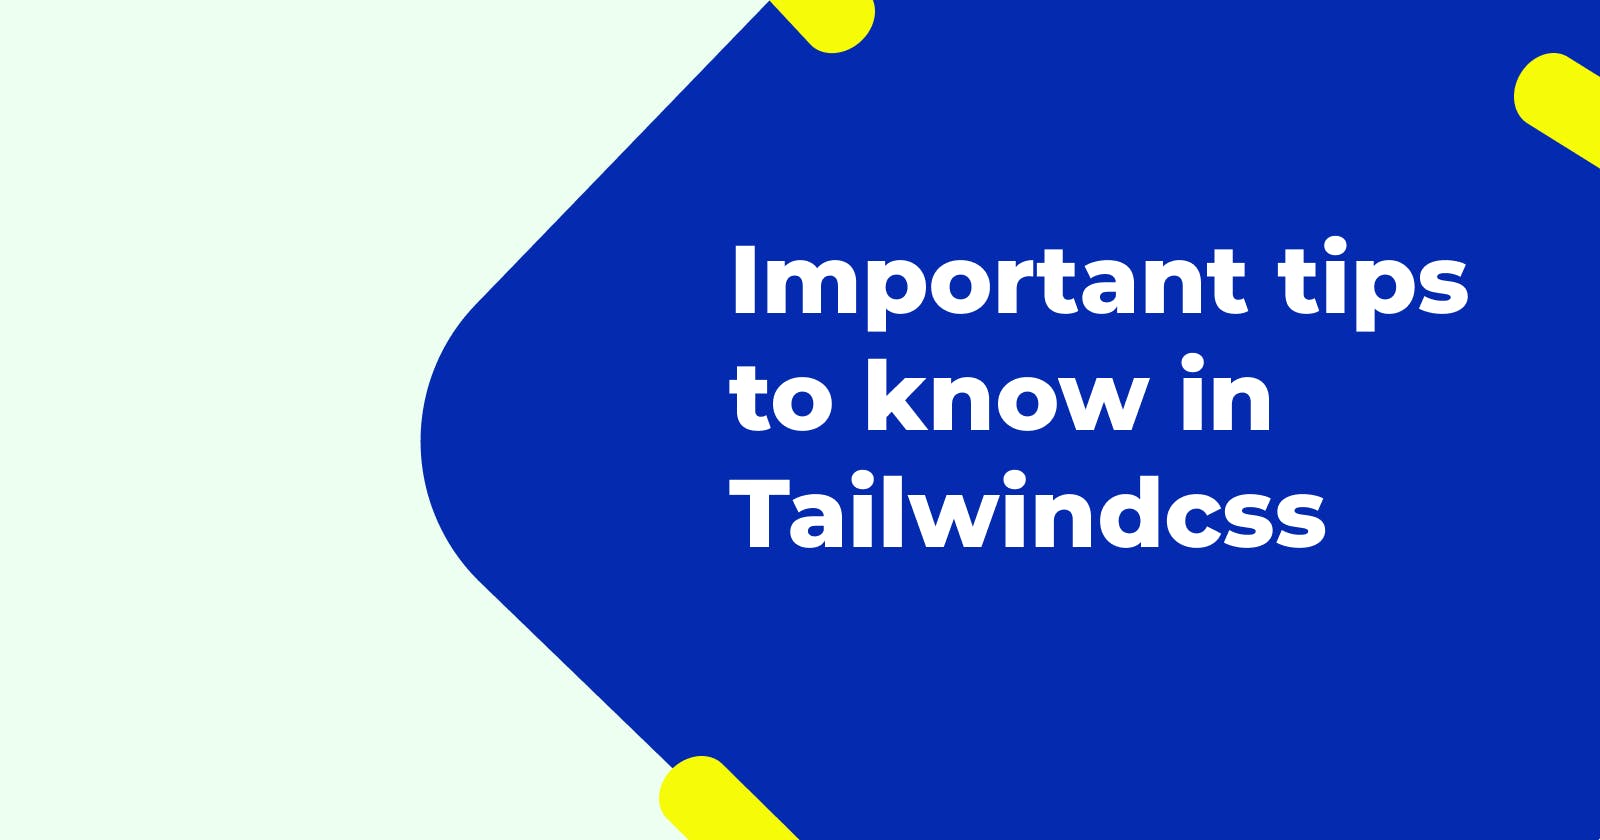 Simple guide to make you know Tailwindcss